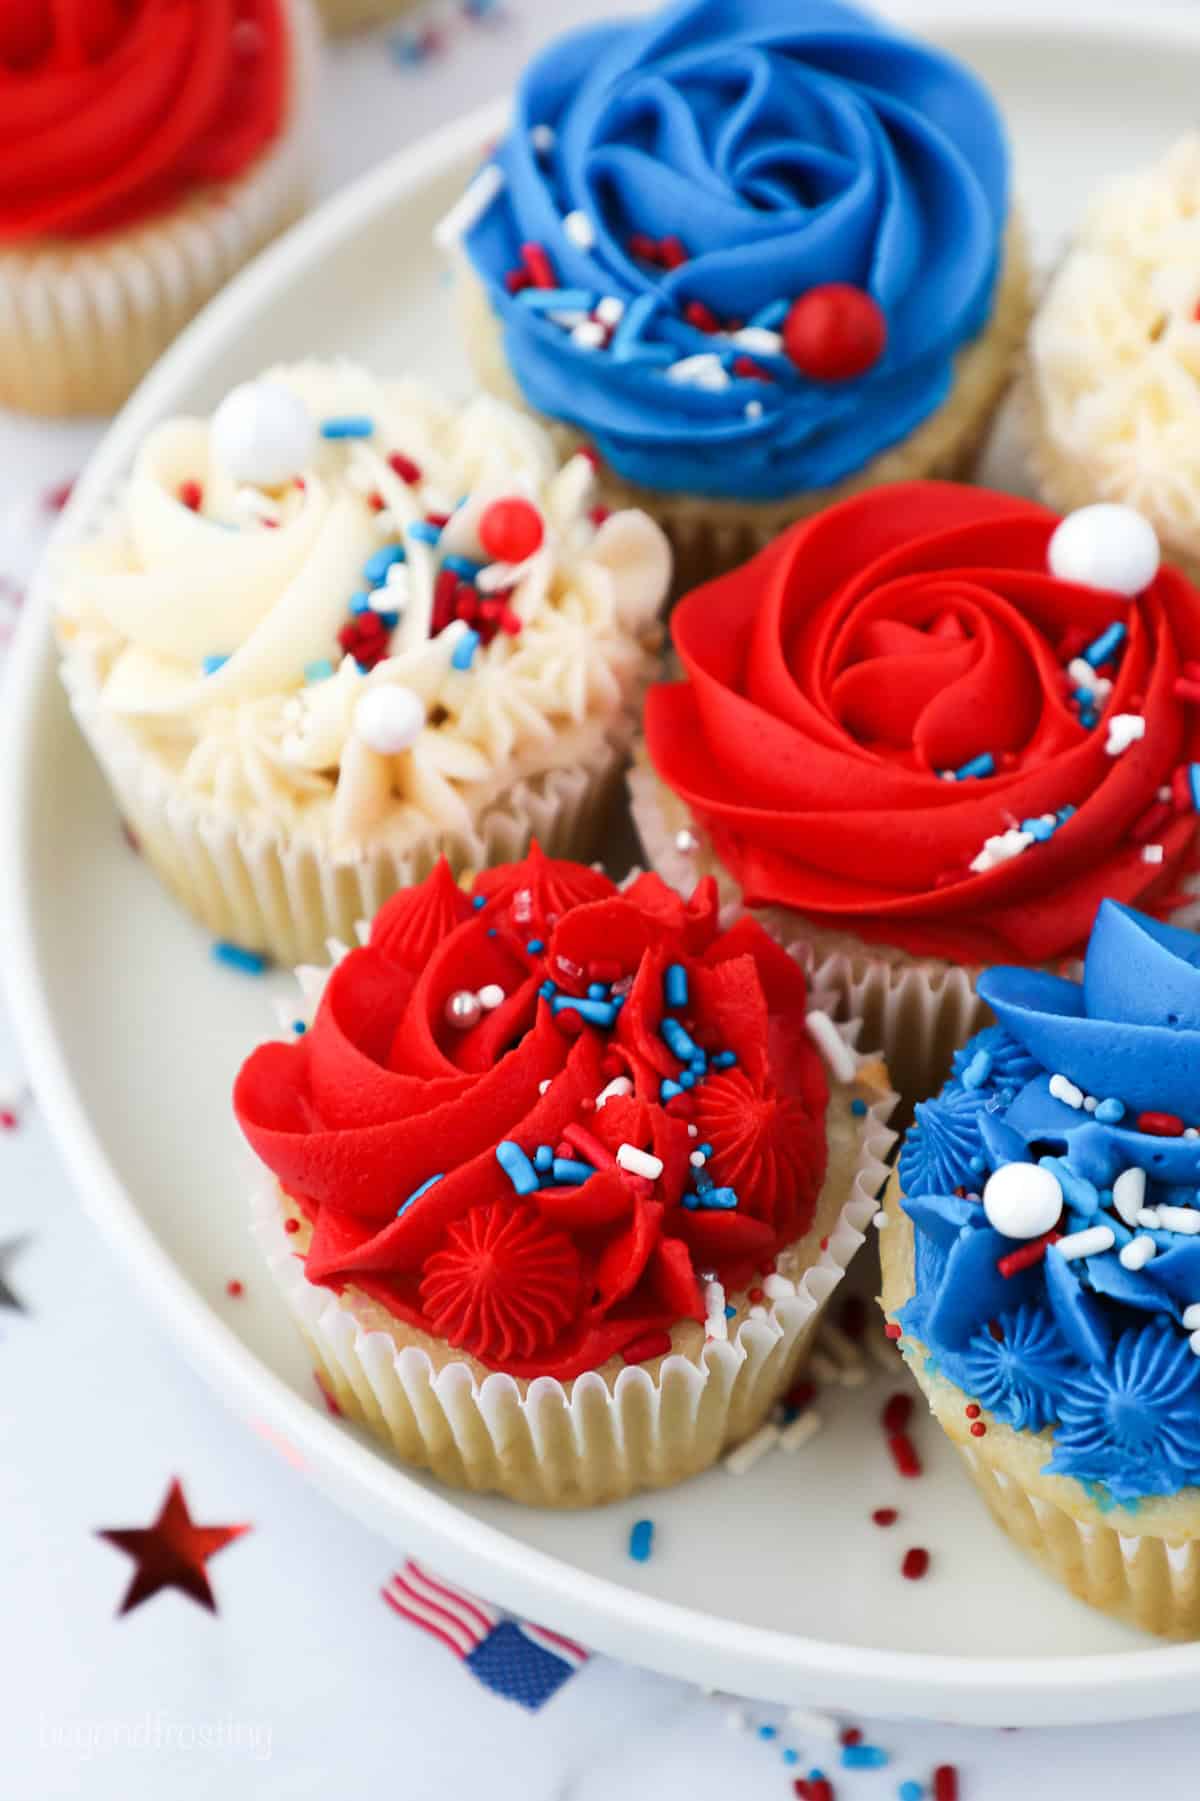 Assorted red, white, and blue frosted cupcakes decorated with sprinkles on a plate.